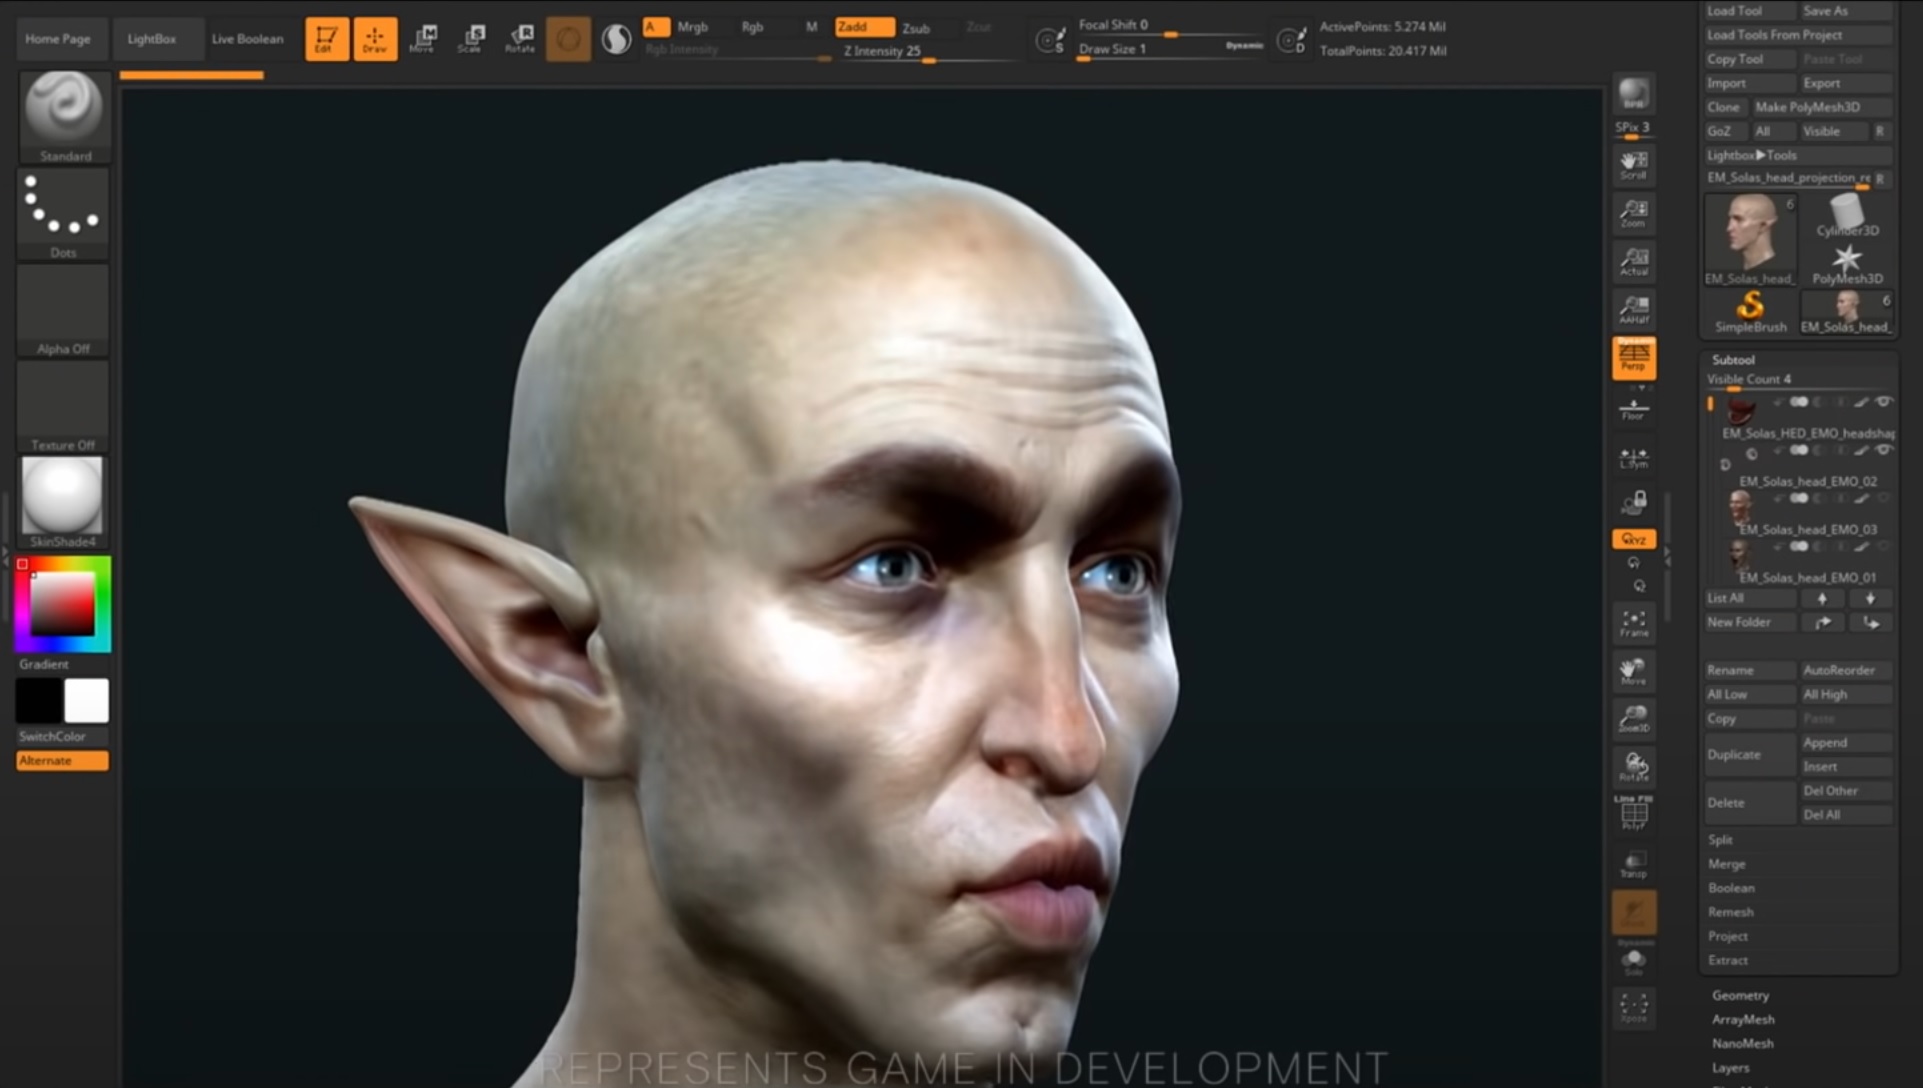 Dragon Age: Dreadwolf - An in development screenshot of Solas's face being modeled, making a kissing face.